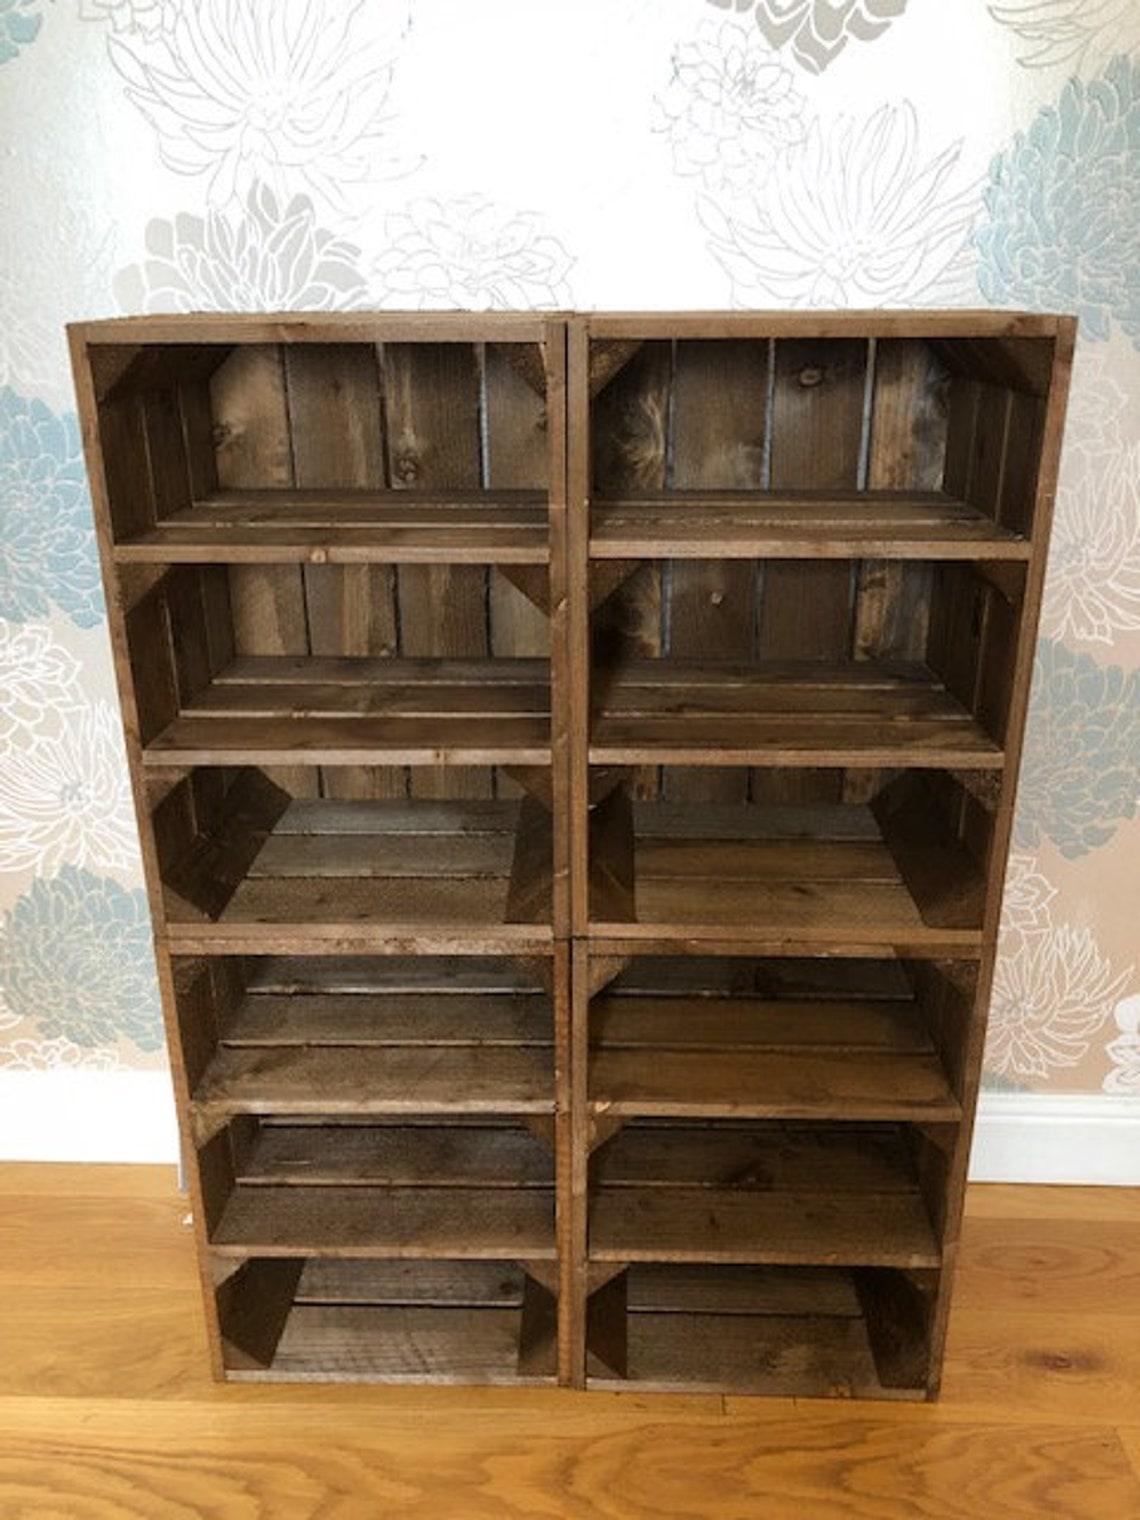 Four Crate Shoe Rack Bench Unit in Medium Brown - Great Crates